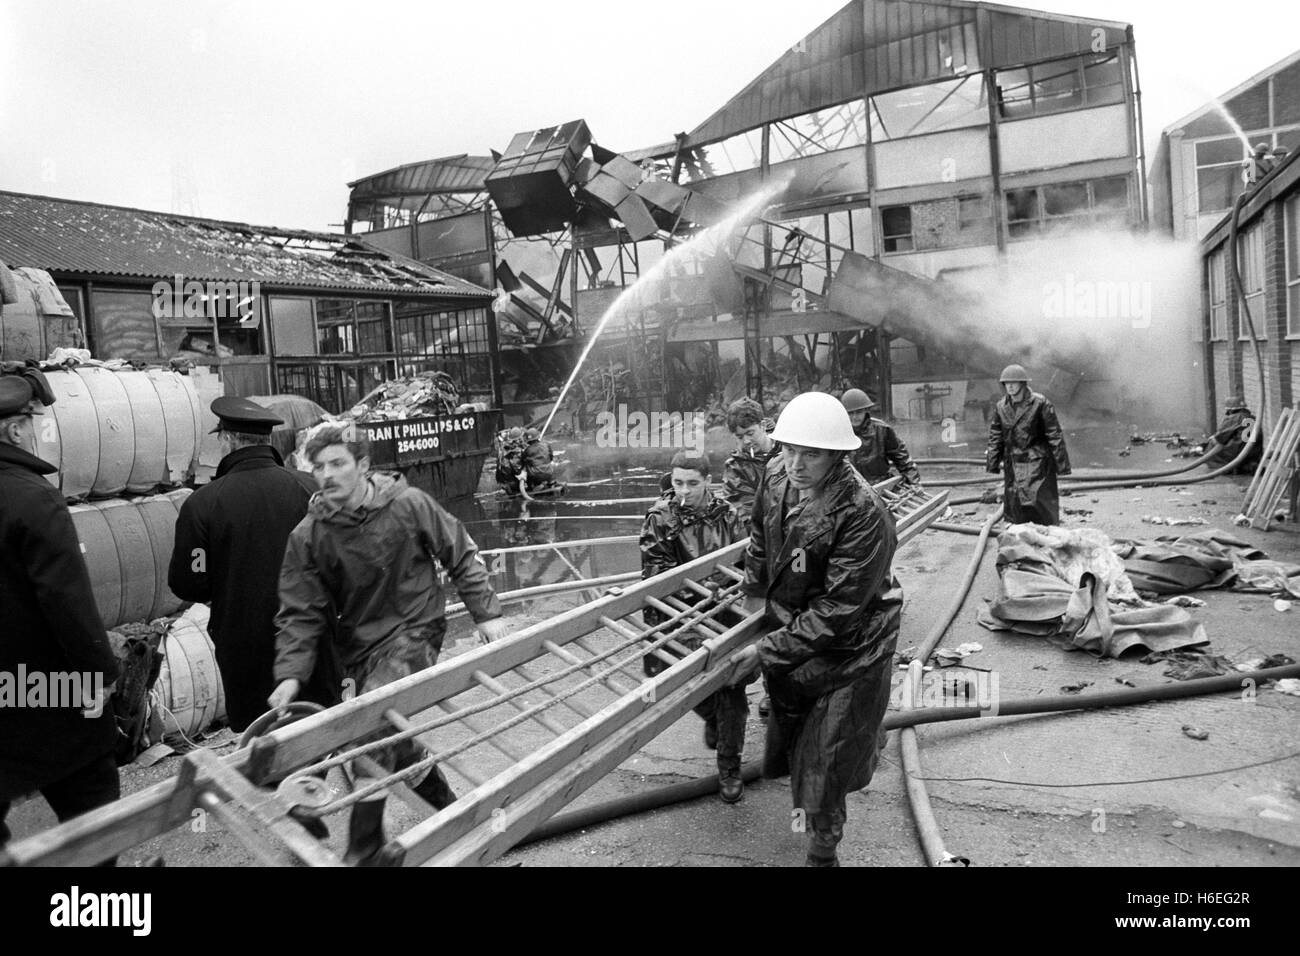 soldiers rushing into action with a ladder unloaded from a 'Green Goddess' fire engine as army firefighters battled a blaze at C and N Rags Ltd in Stratford, London. Stock Photo